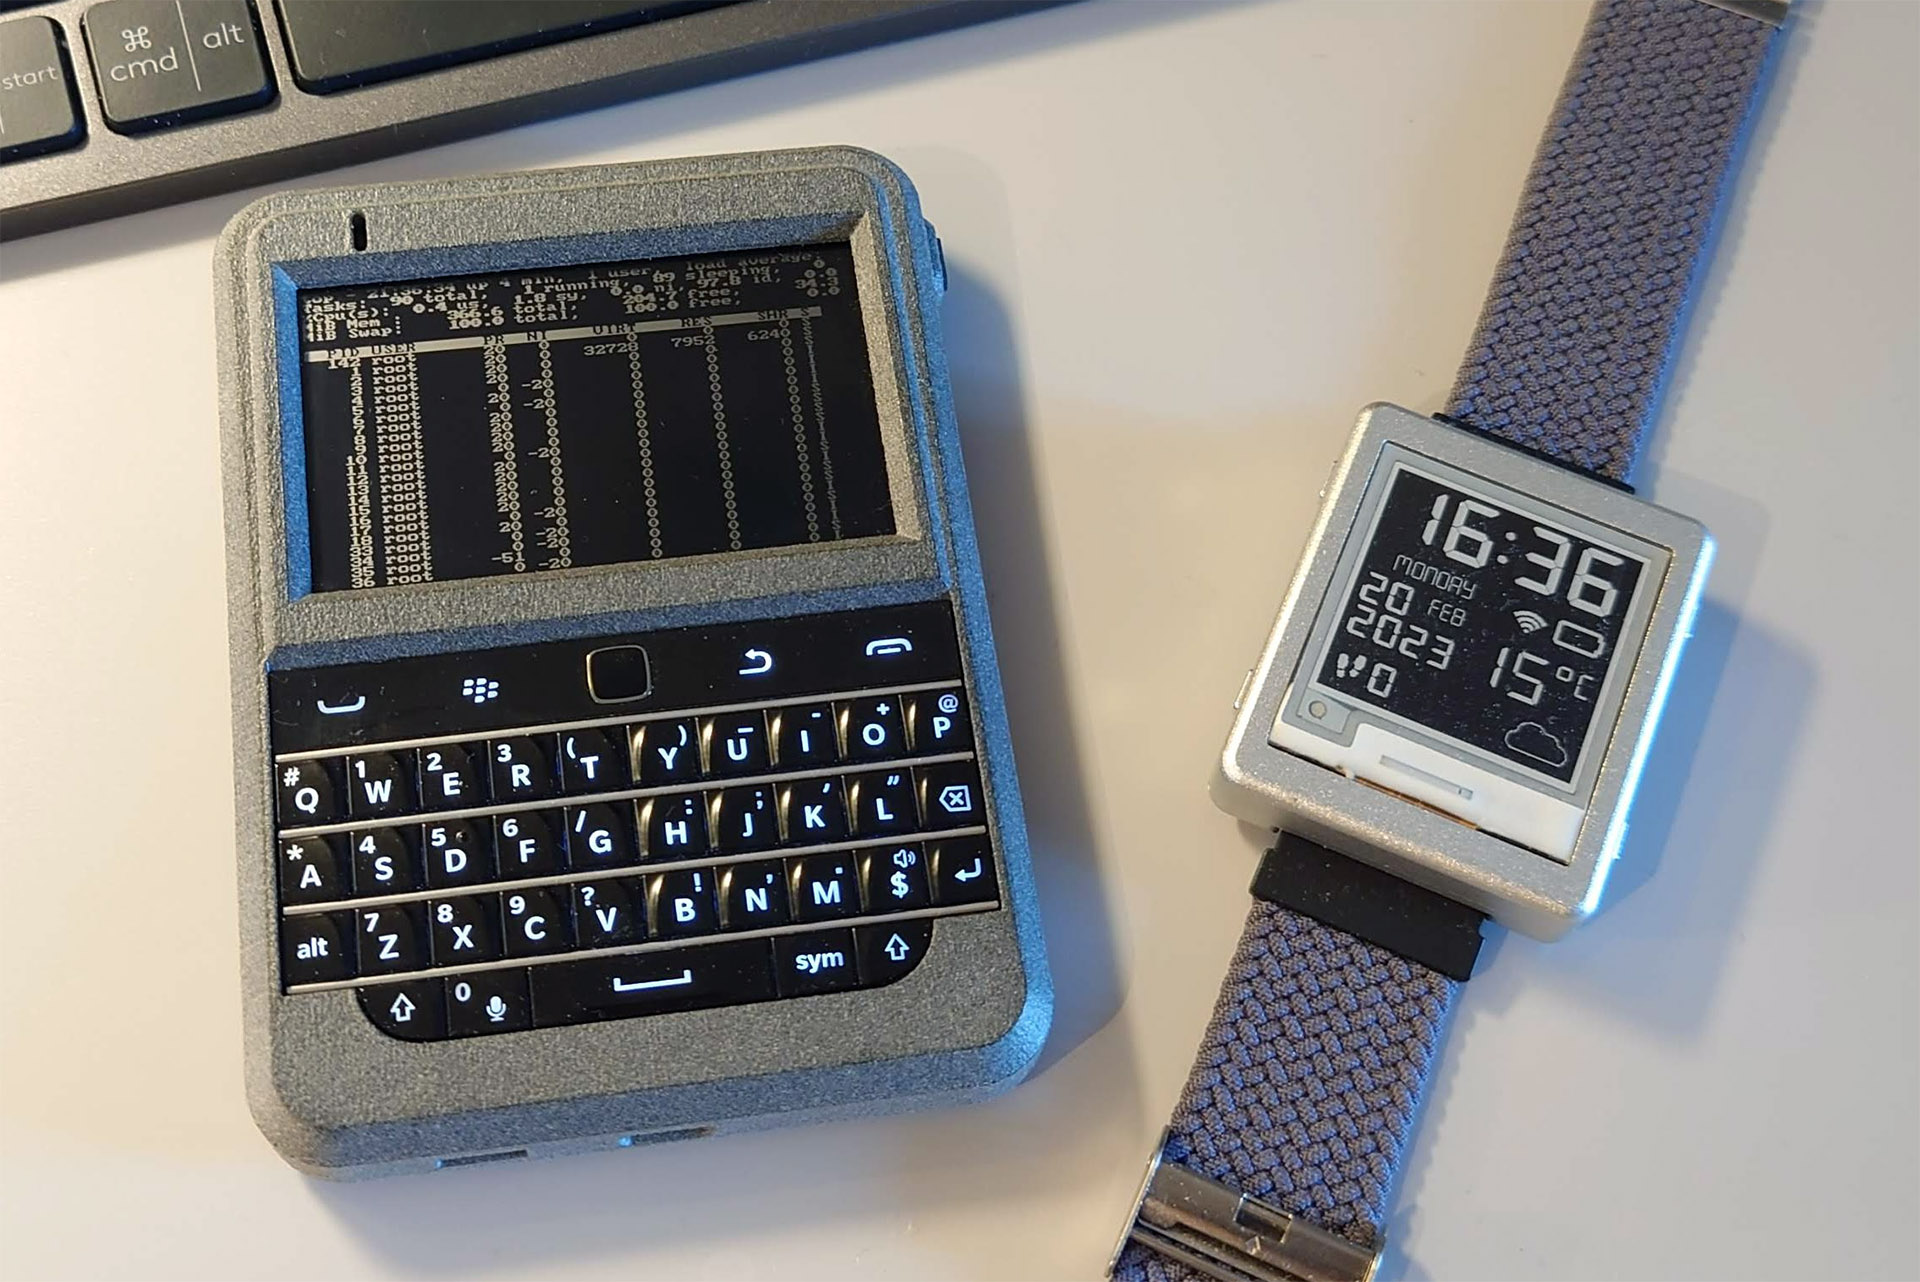 A Beepberry with a 3D-printed shell next to a ‘Watchy’ smartwatch.